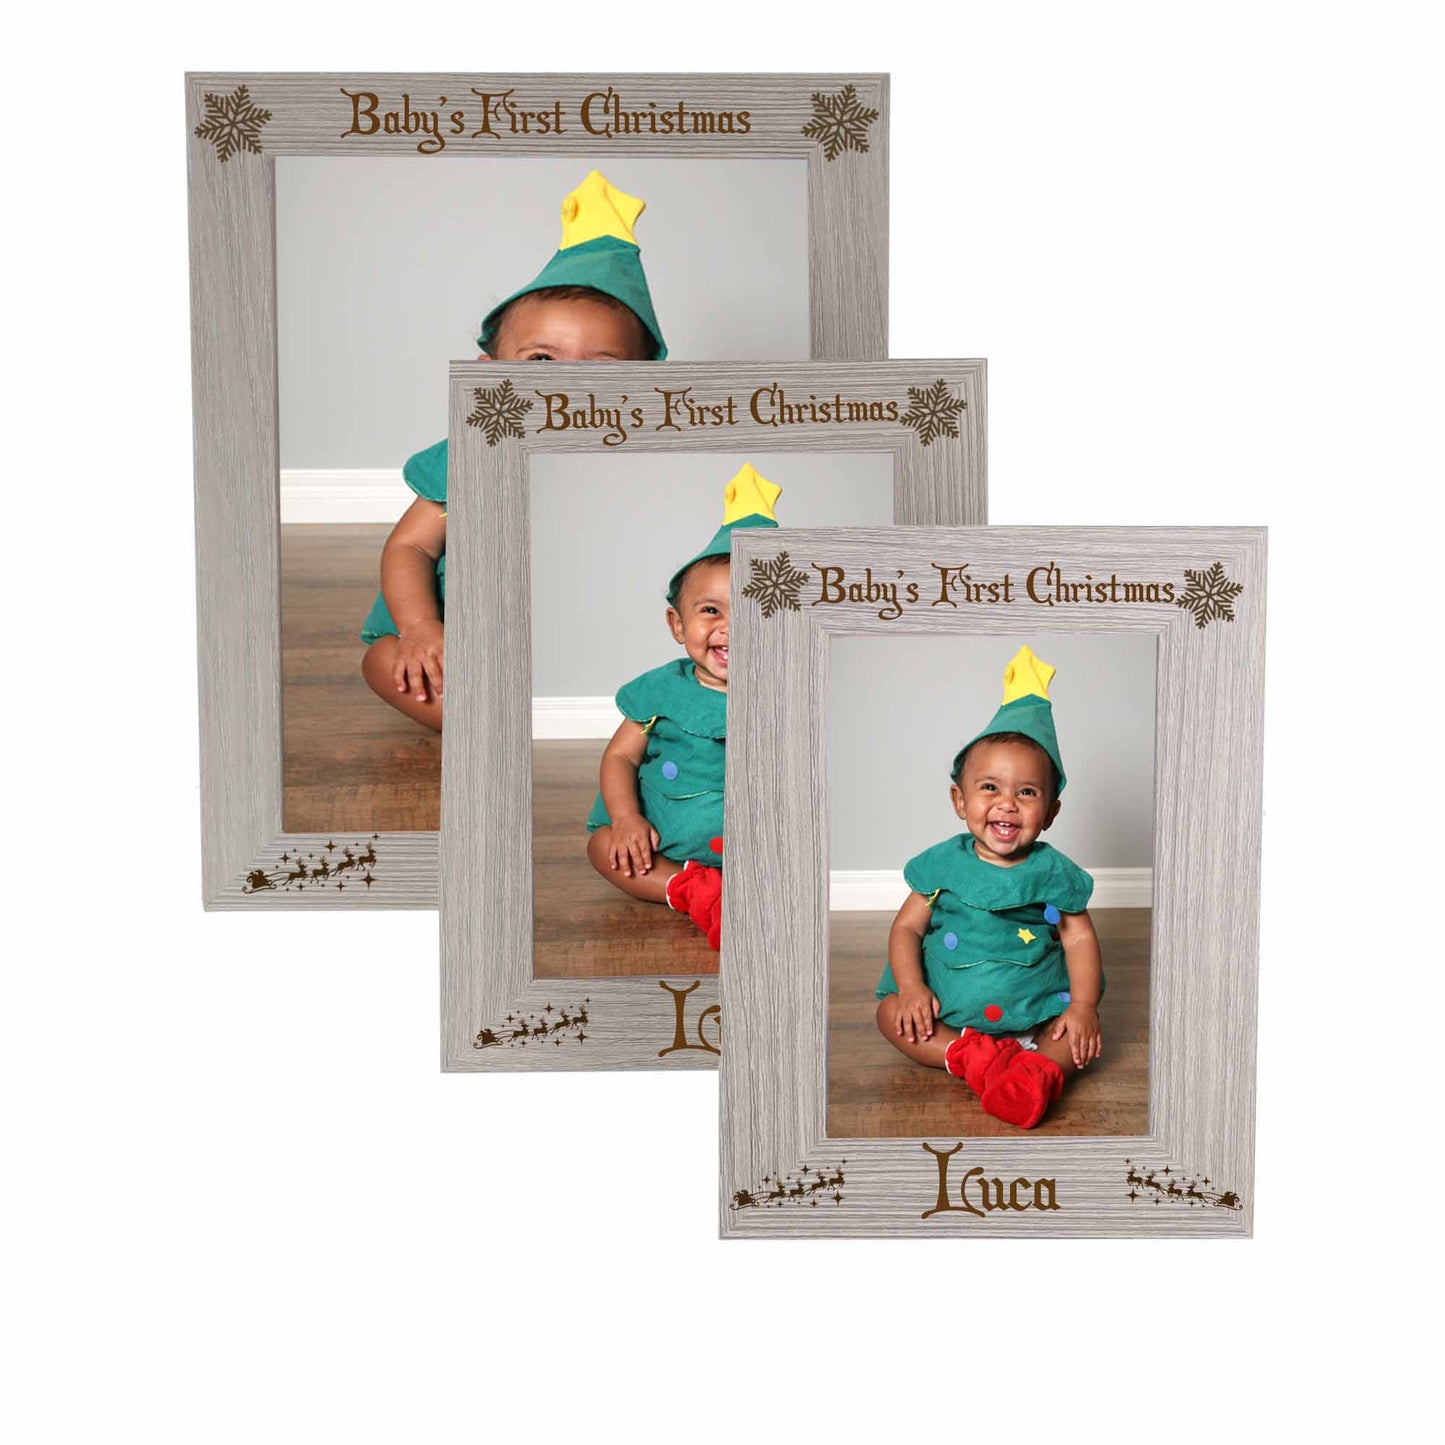 Personalised Engraved Baby's First Christmas Photo Frame  - Always Looking Good -   